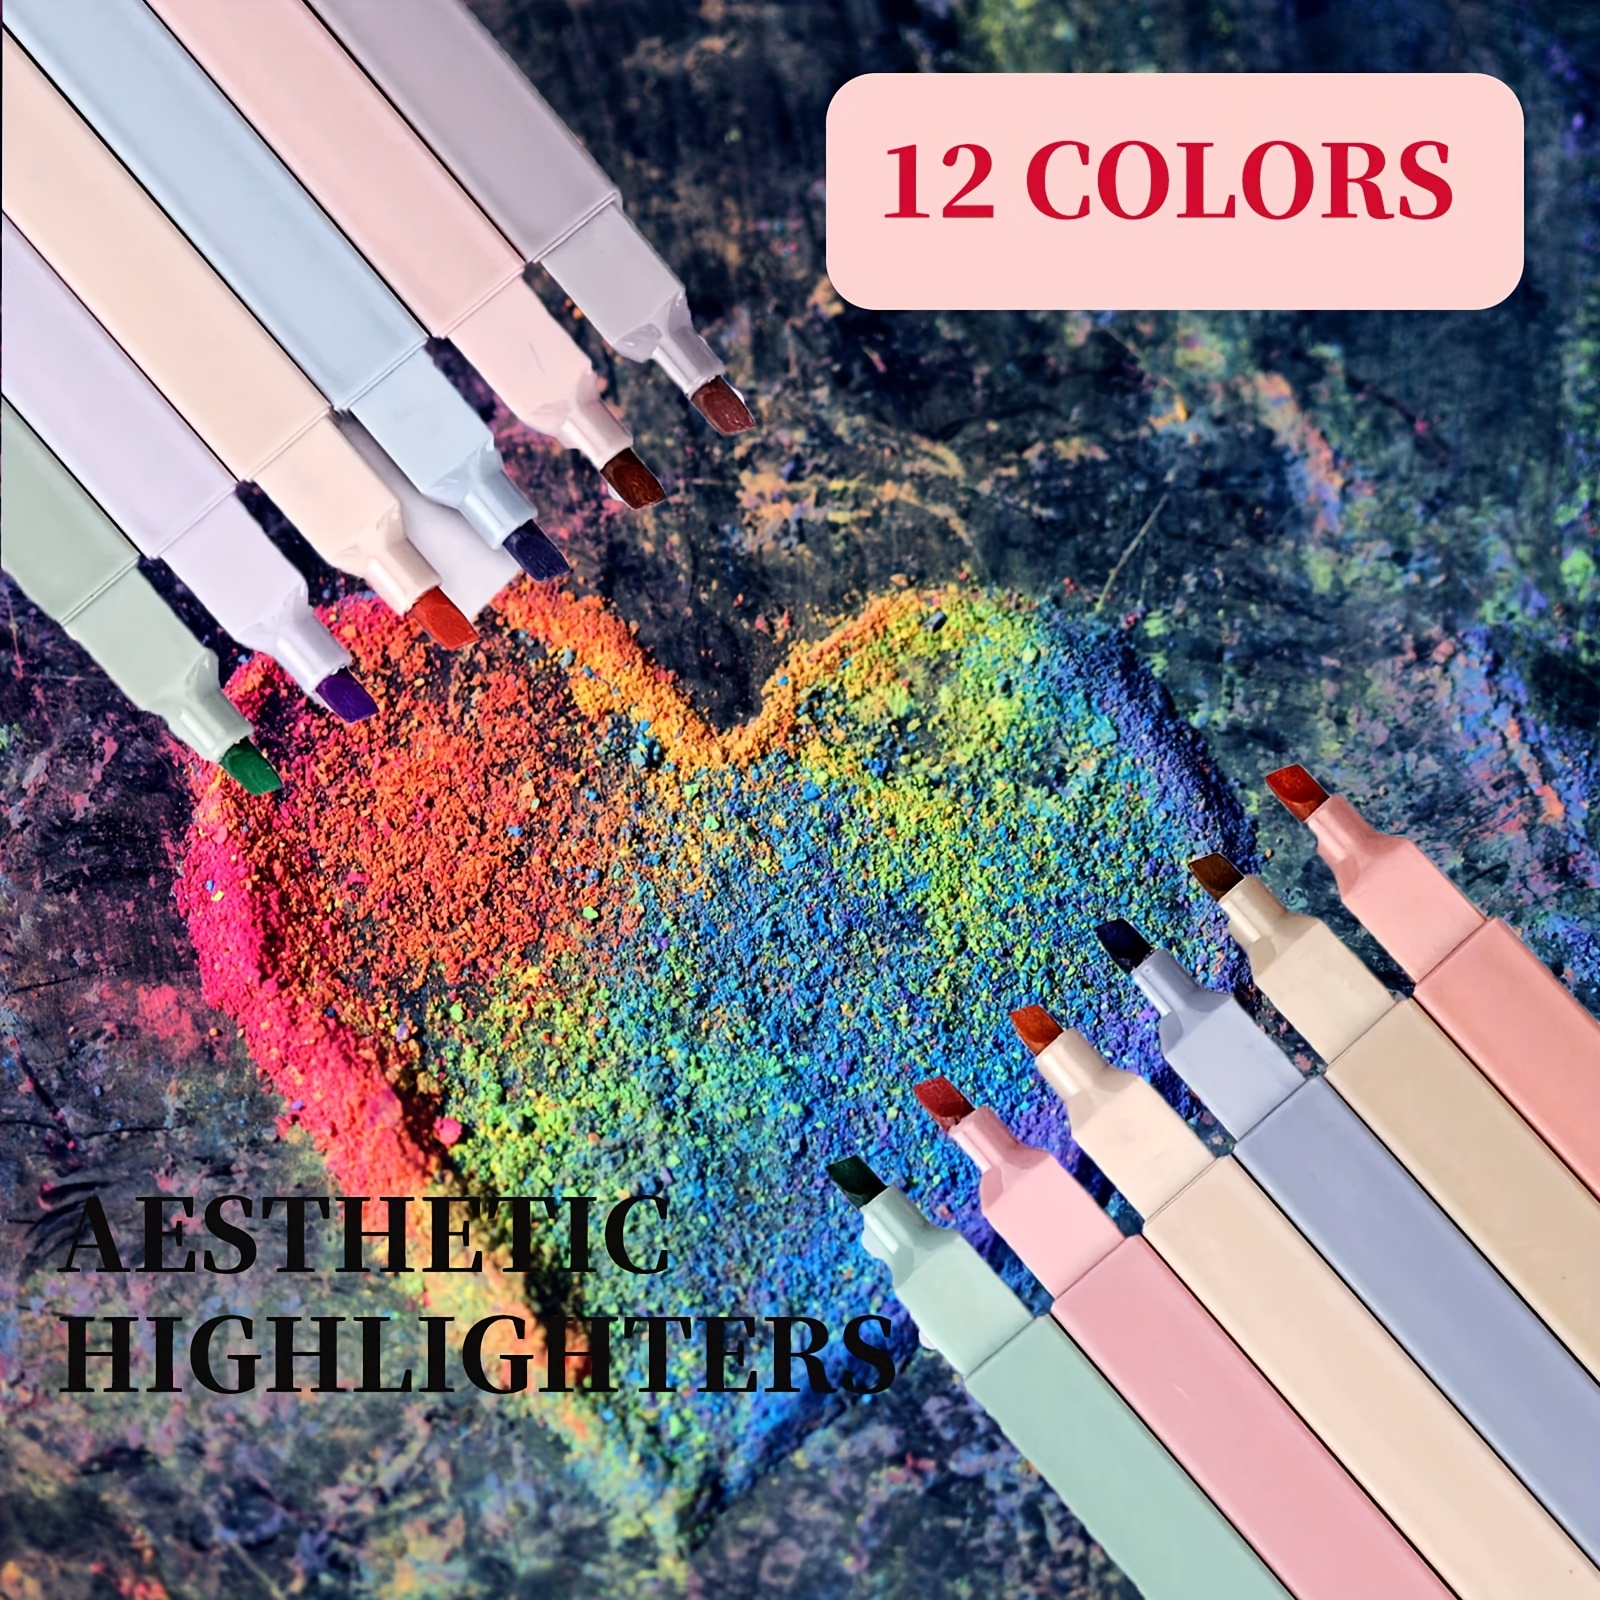 Aesthetic Highlighters Cute Assorted Colors Bible Highlighters and No Bleed with Soft Tip 12 Color Aesthetic